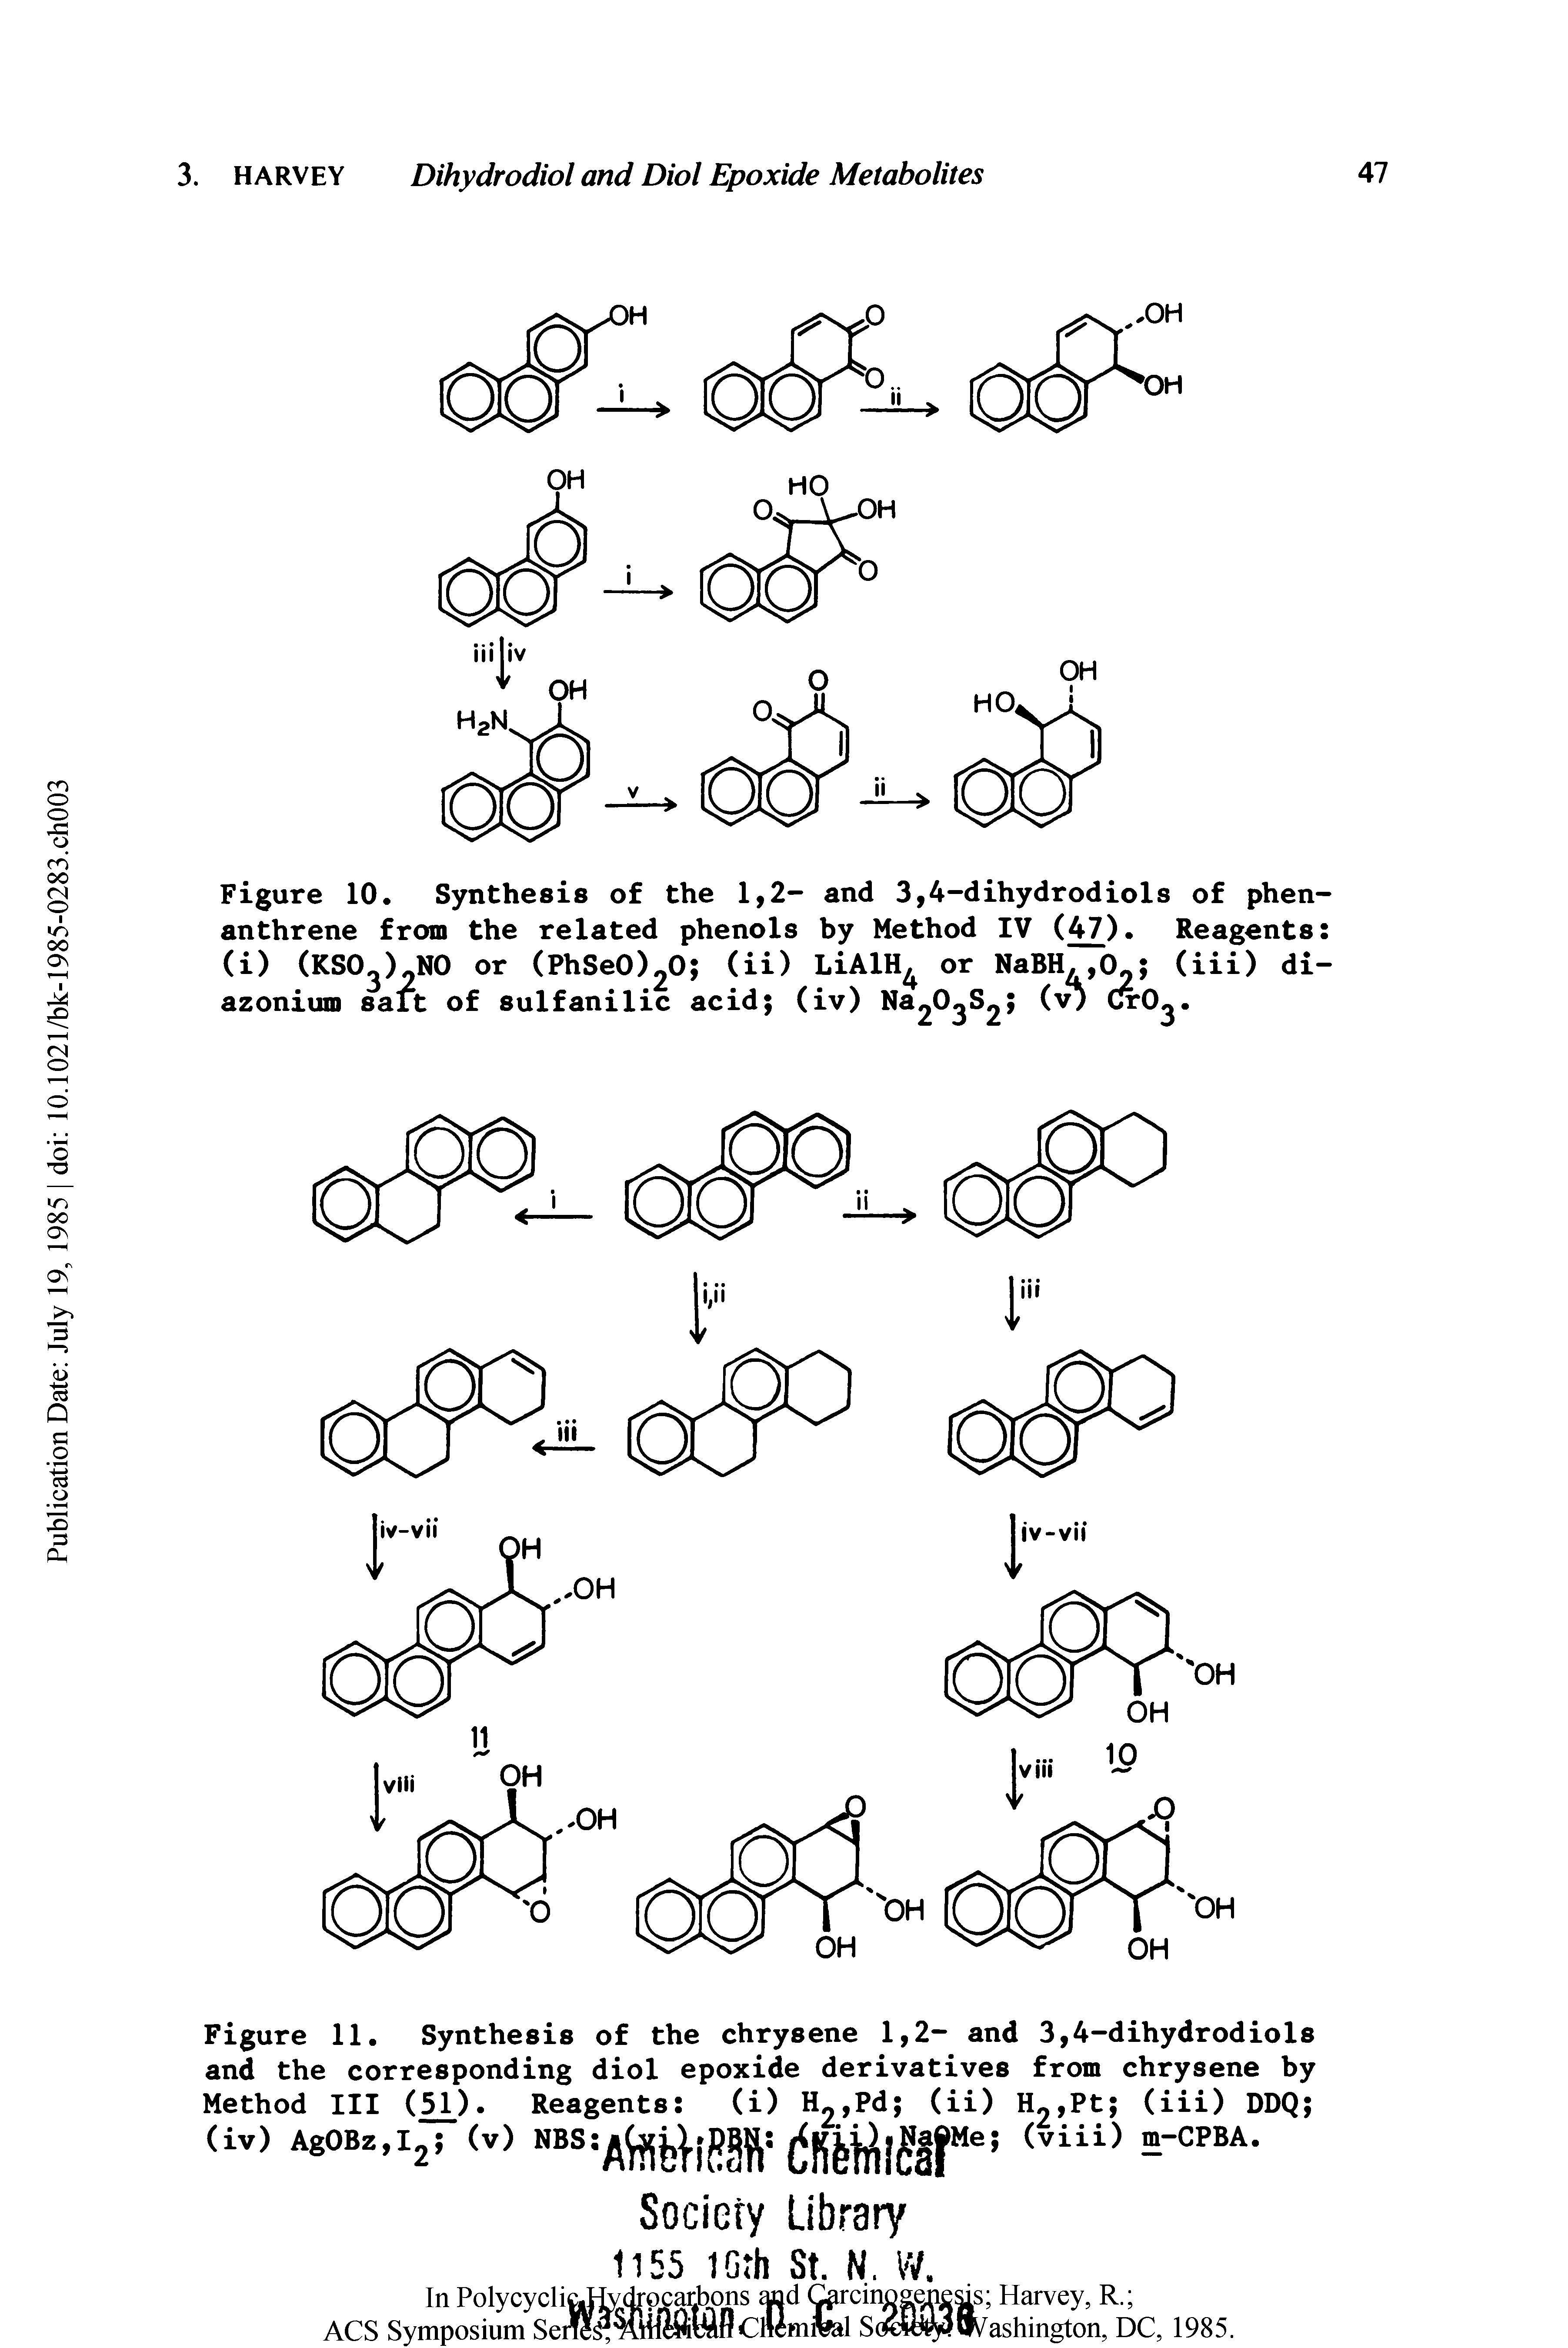 Figure 10. Synthesis of the 1,2- and 3,4-dihydrodiols of phen-anthrene from the related phenols by Method IV (47). Reagents (i) (KSO ) NO or (PhSe0>20 (ii) LiAlH or NaBH,, 0 (iii) di-azonium salt of sulfanilic acid (iv) Na O S (vJ (JrO. ...